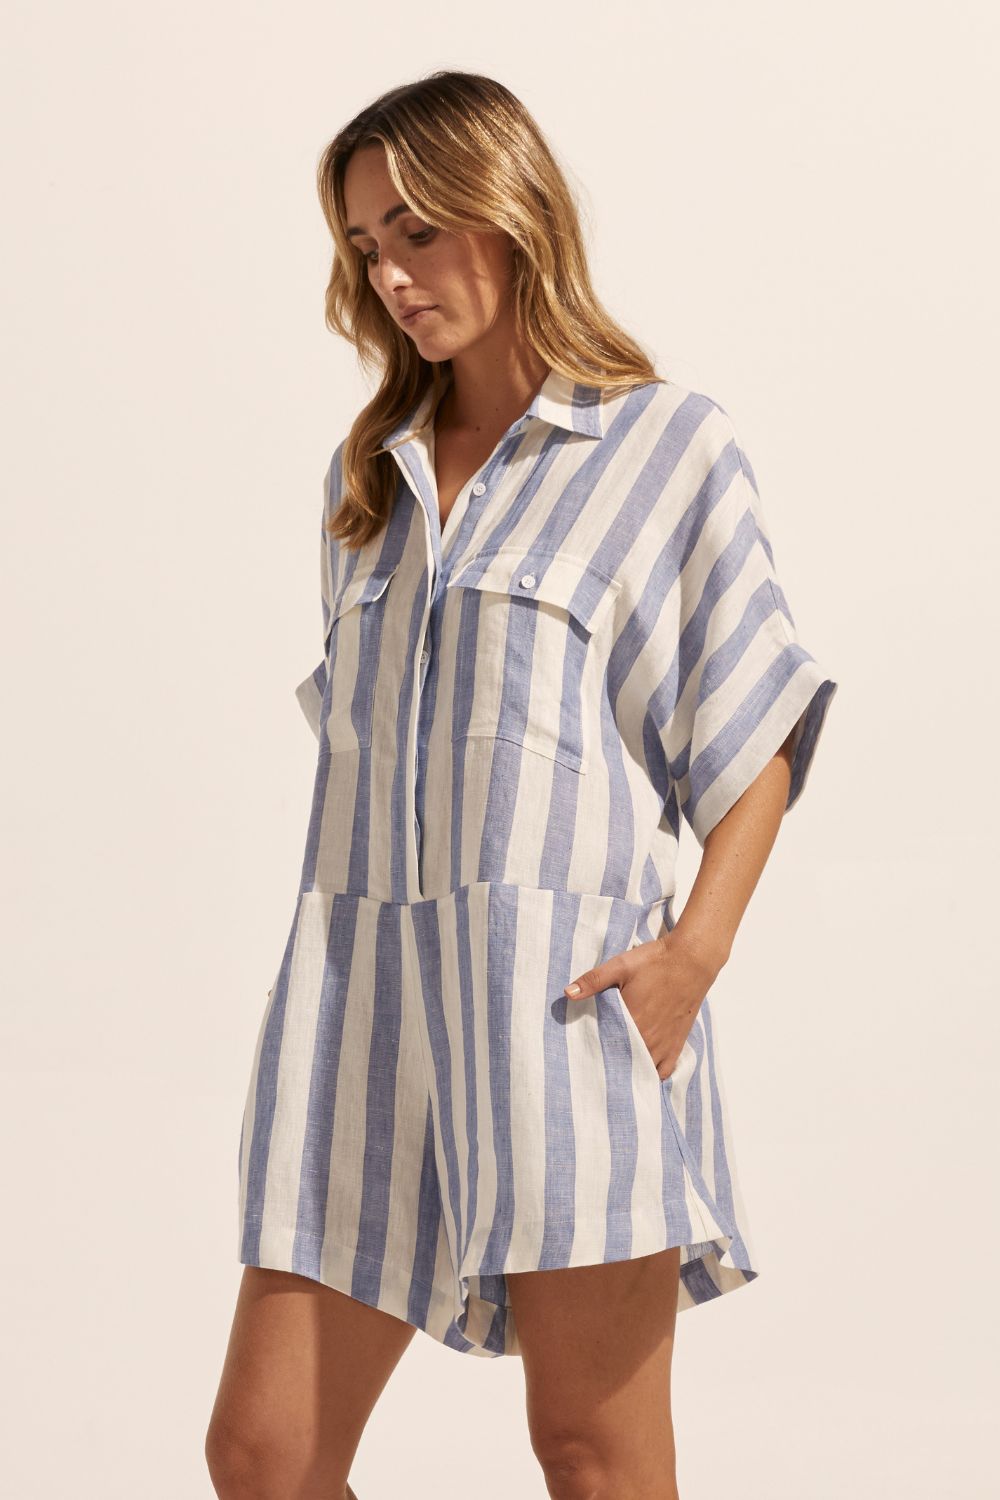 blue and white stripe, jumpsuit, button down collar, oversized patch pockets, side view